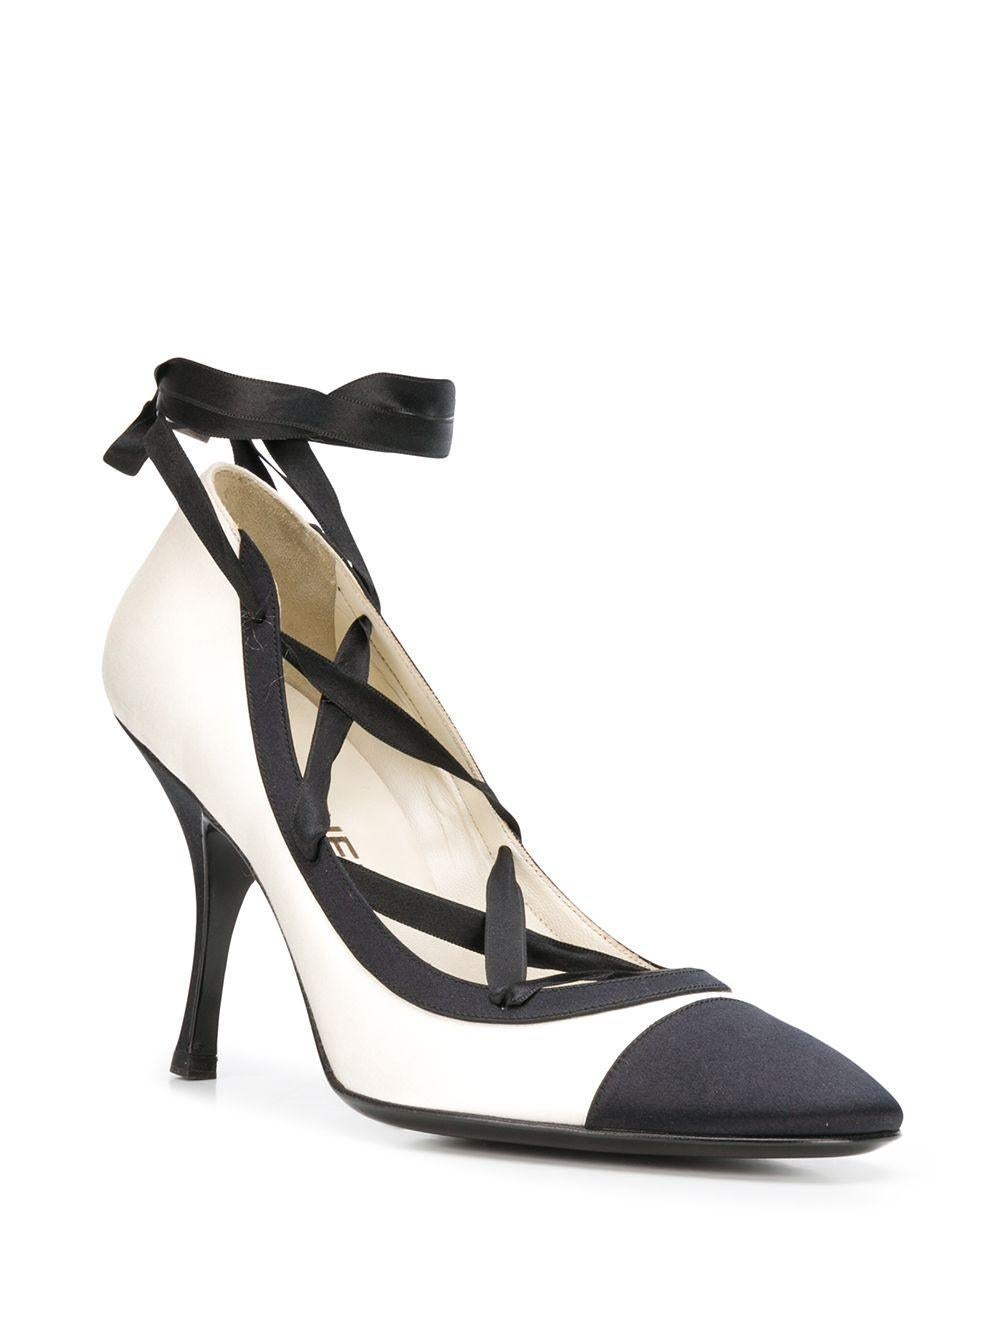 Crafted in Italy from a combination of smooth black and cream silk, these vintage pumps by Chanel are for the fashion forward, featuring a mid high stiletto heel, a rounded almond toe and an elegant leather lace-up front fastening. These contrasting